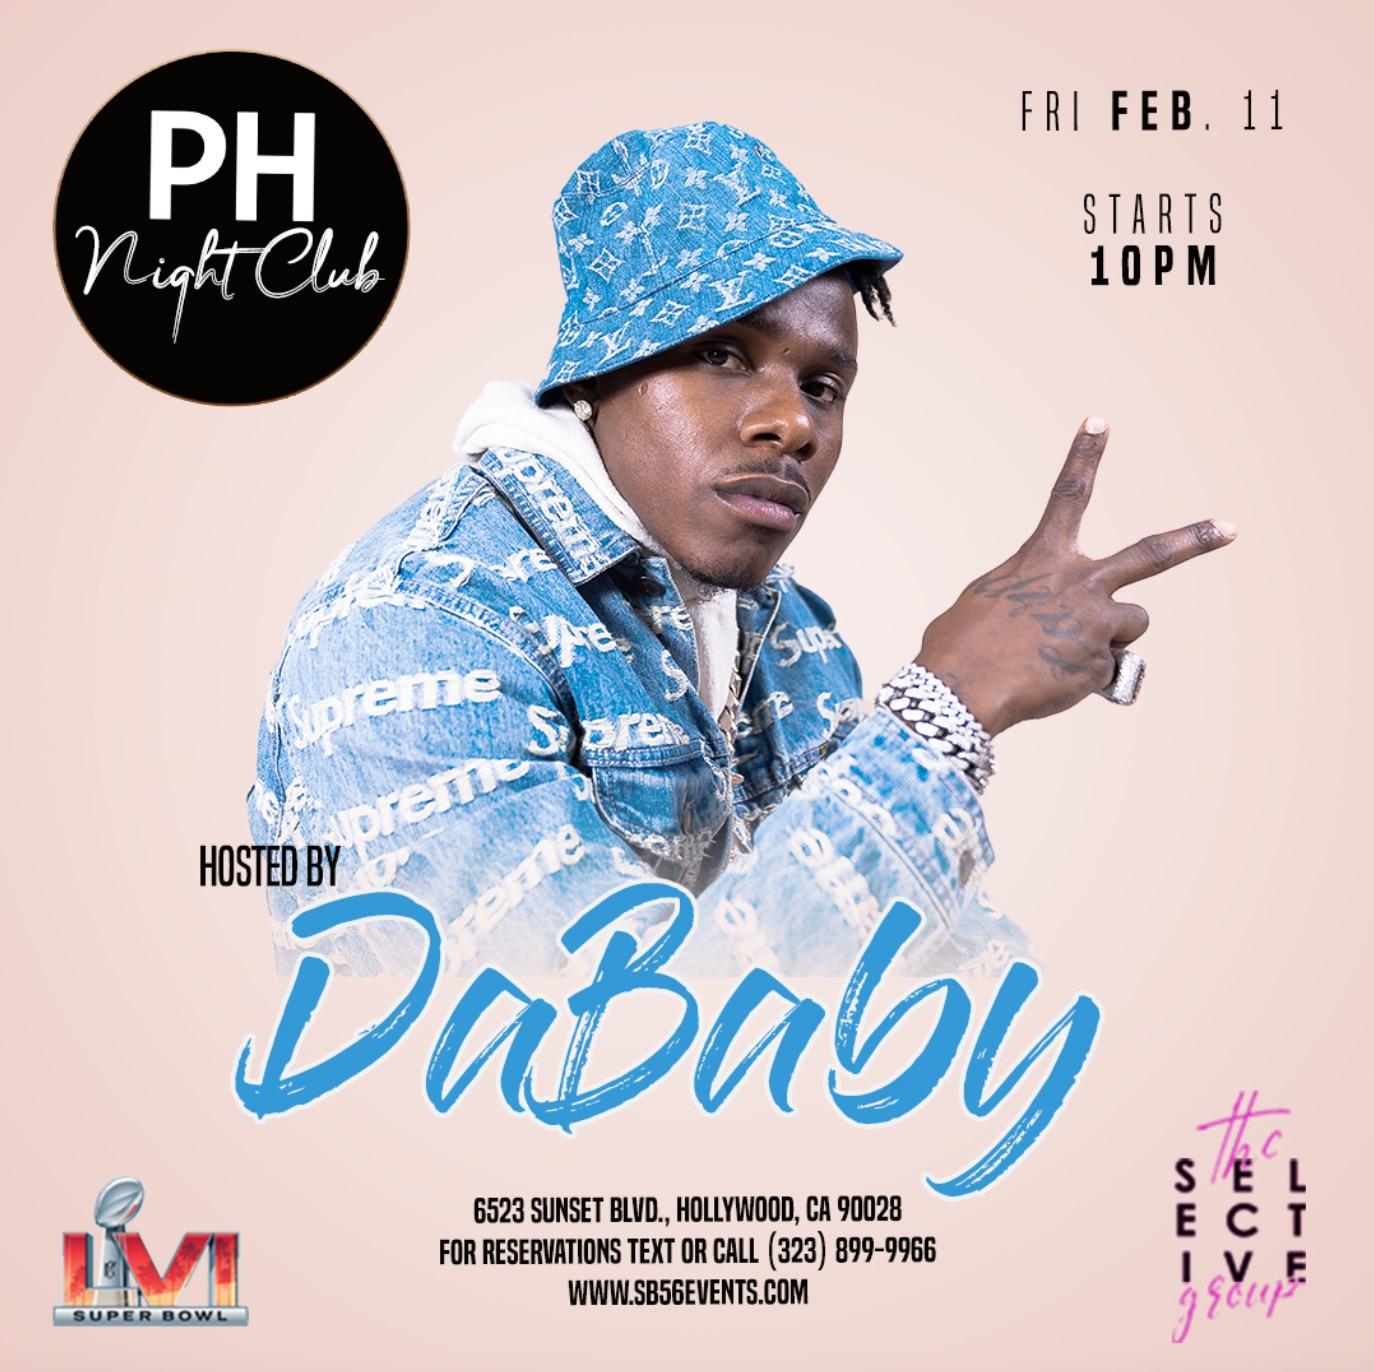 PH NIGHT CLUB: SUPERBOWL FRIDAY - HOSTED BY DABABY